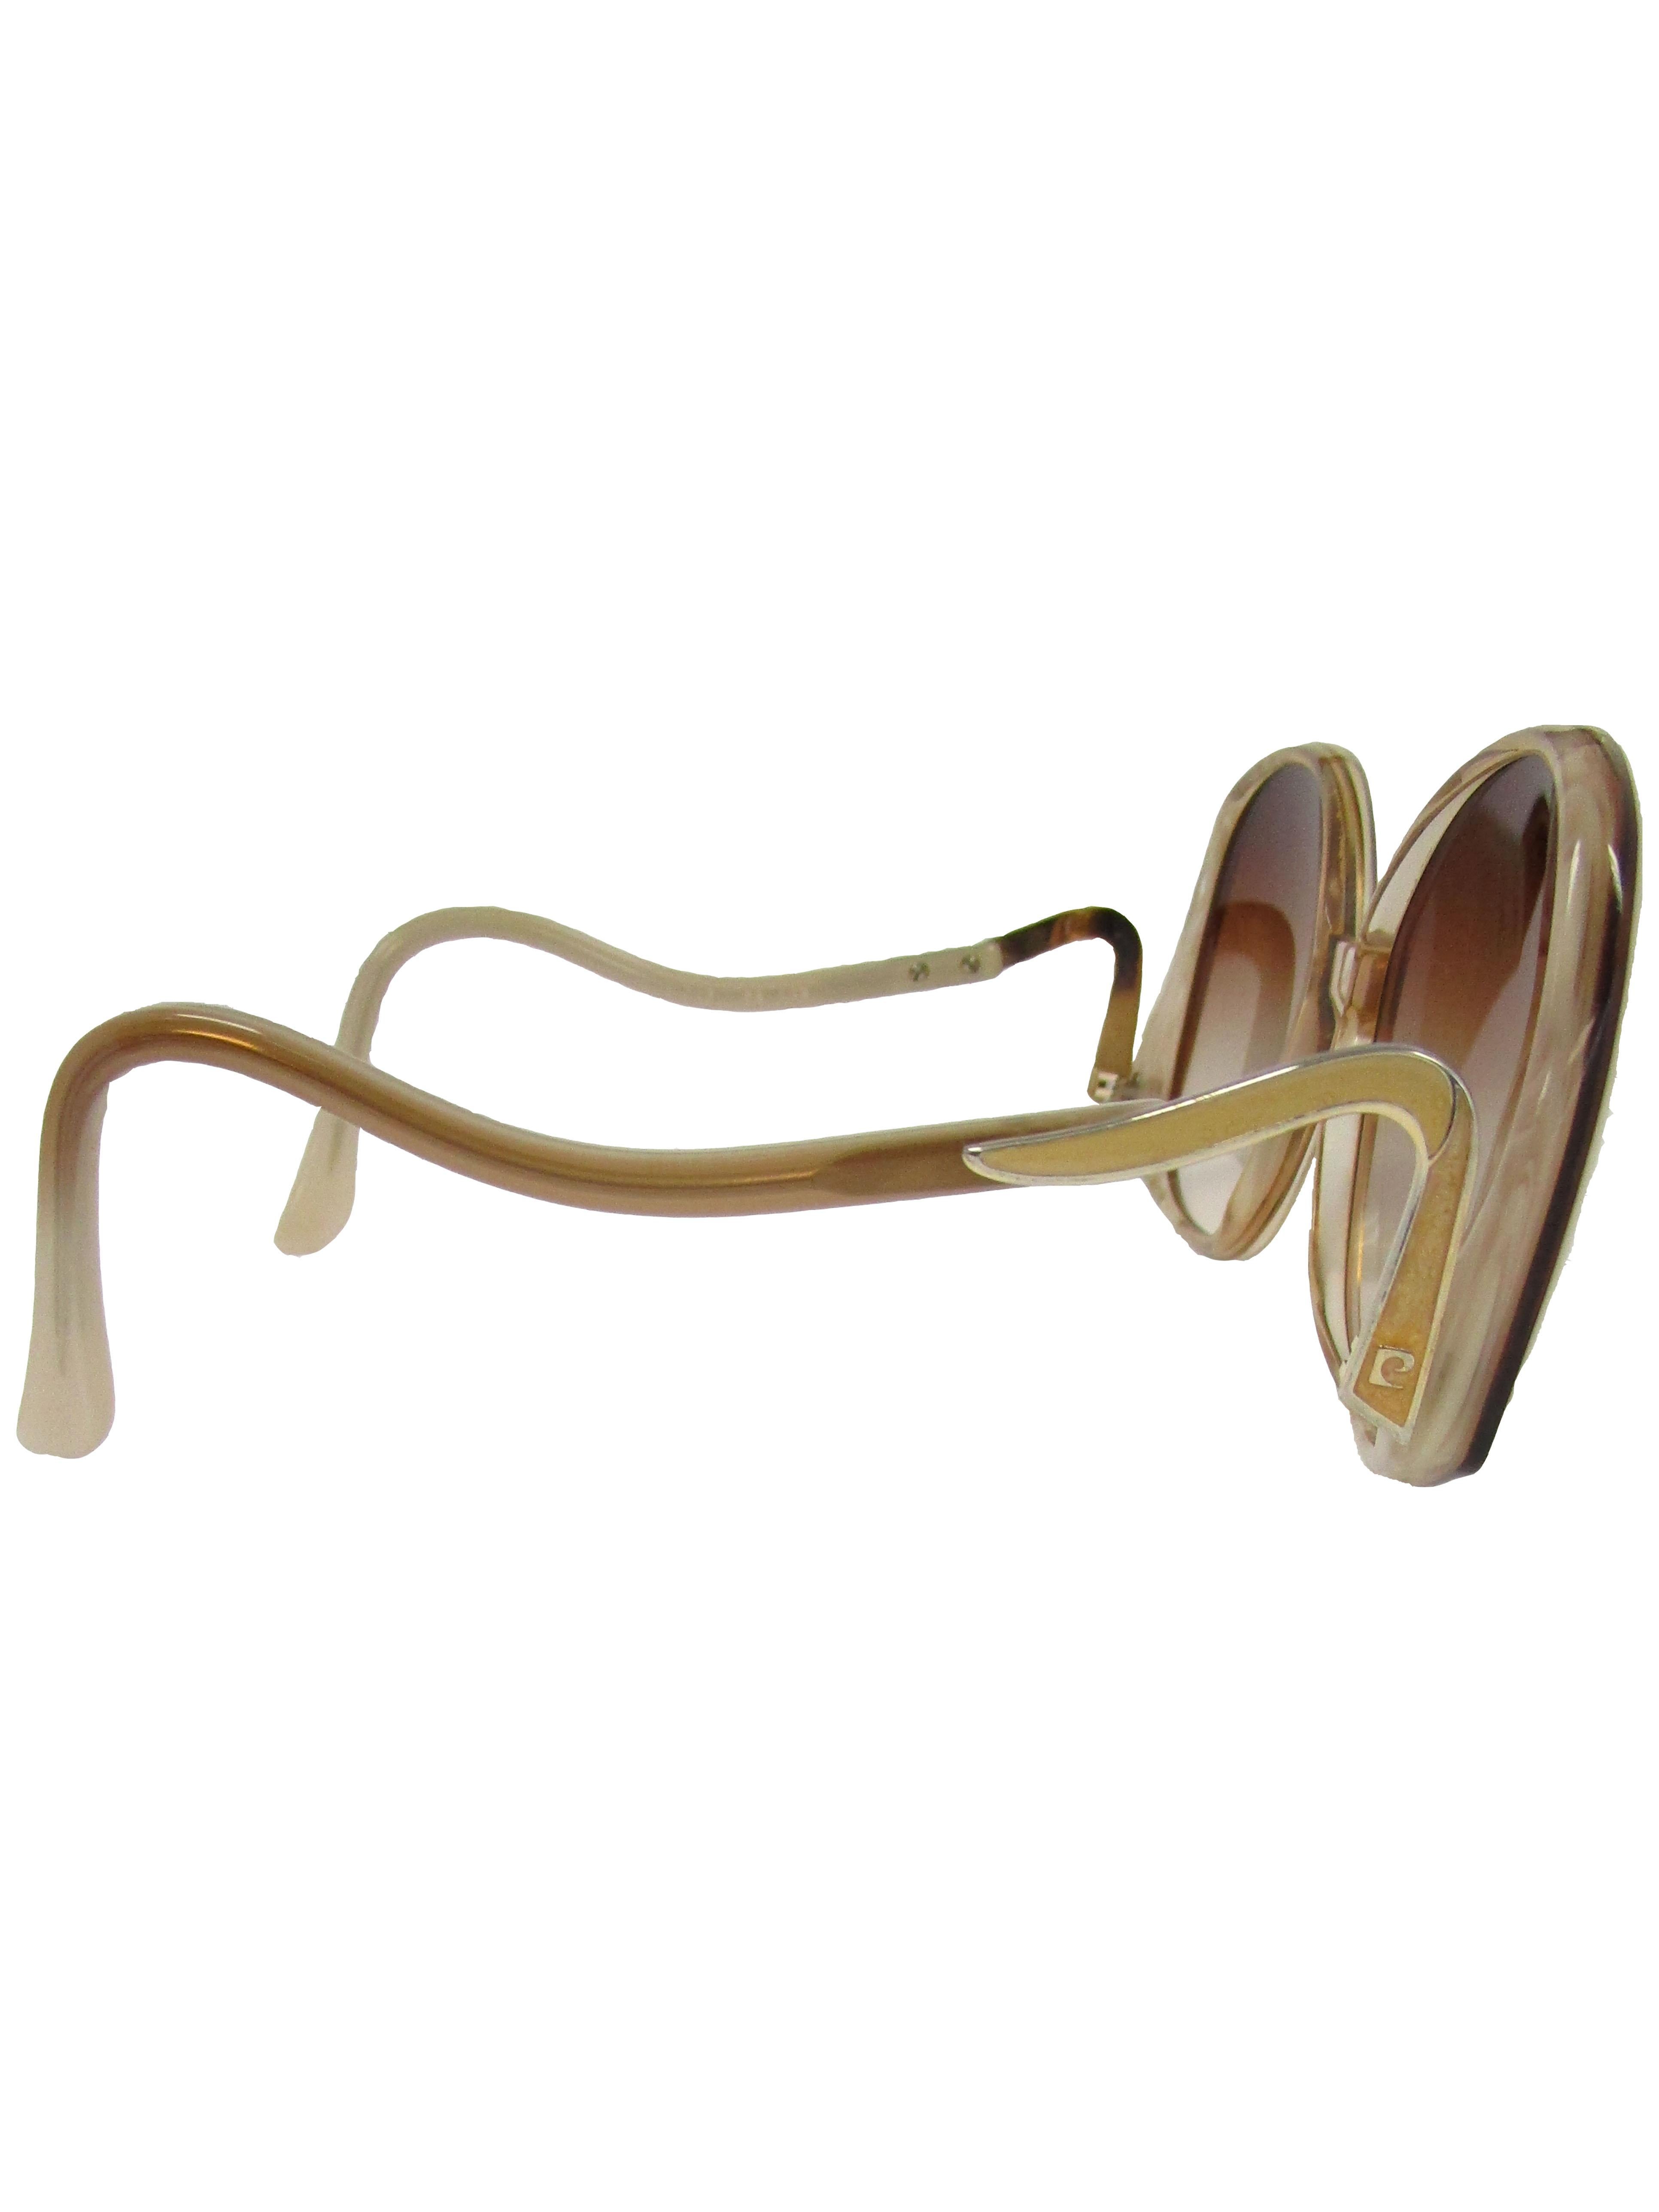 1970's Fantastic Pierre Cardin Amber Lens and Ivory Framed Sunglasses  In Excellent Condition For Sale In Houston, TX